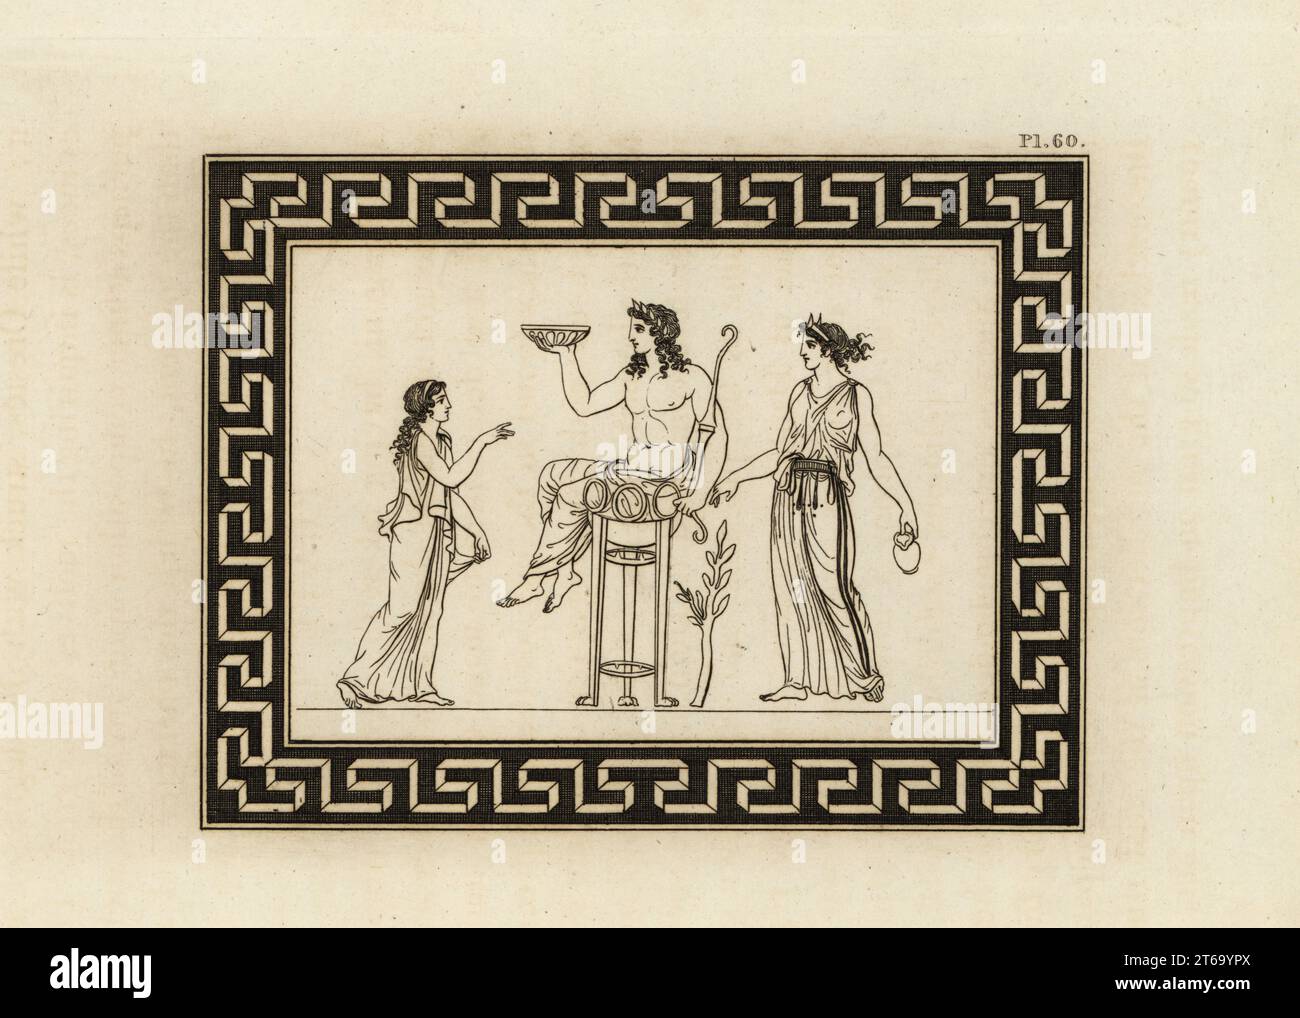 Manto, daughter of the prophet Tiresias, before the god Apollo on a tripod, A priestess at right pronounces the oracle. Copperplate engraving by Thomas Kirk (1765-1797) from Sir William Hamiltons Outlines from the Figures and Compositions upon the Greek, Roman and Etruscan Vases of the Late Sir Hamilton, T. MLean, London, 1834. Stock Photo